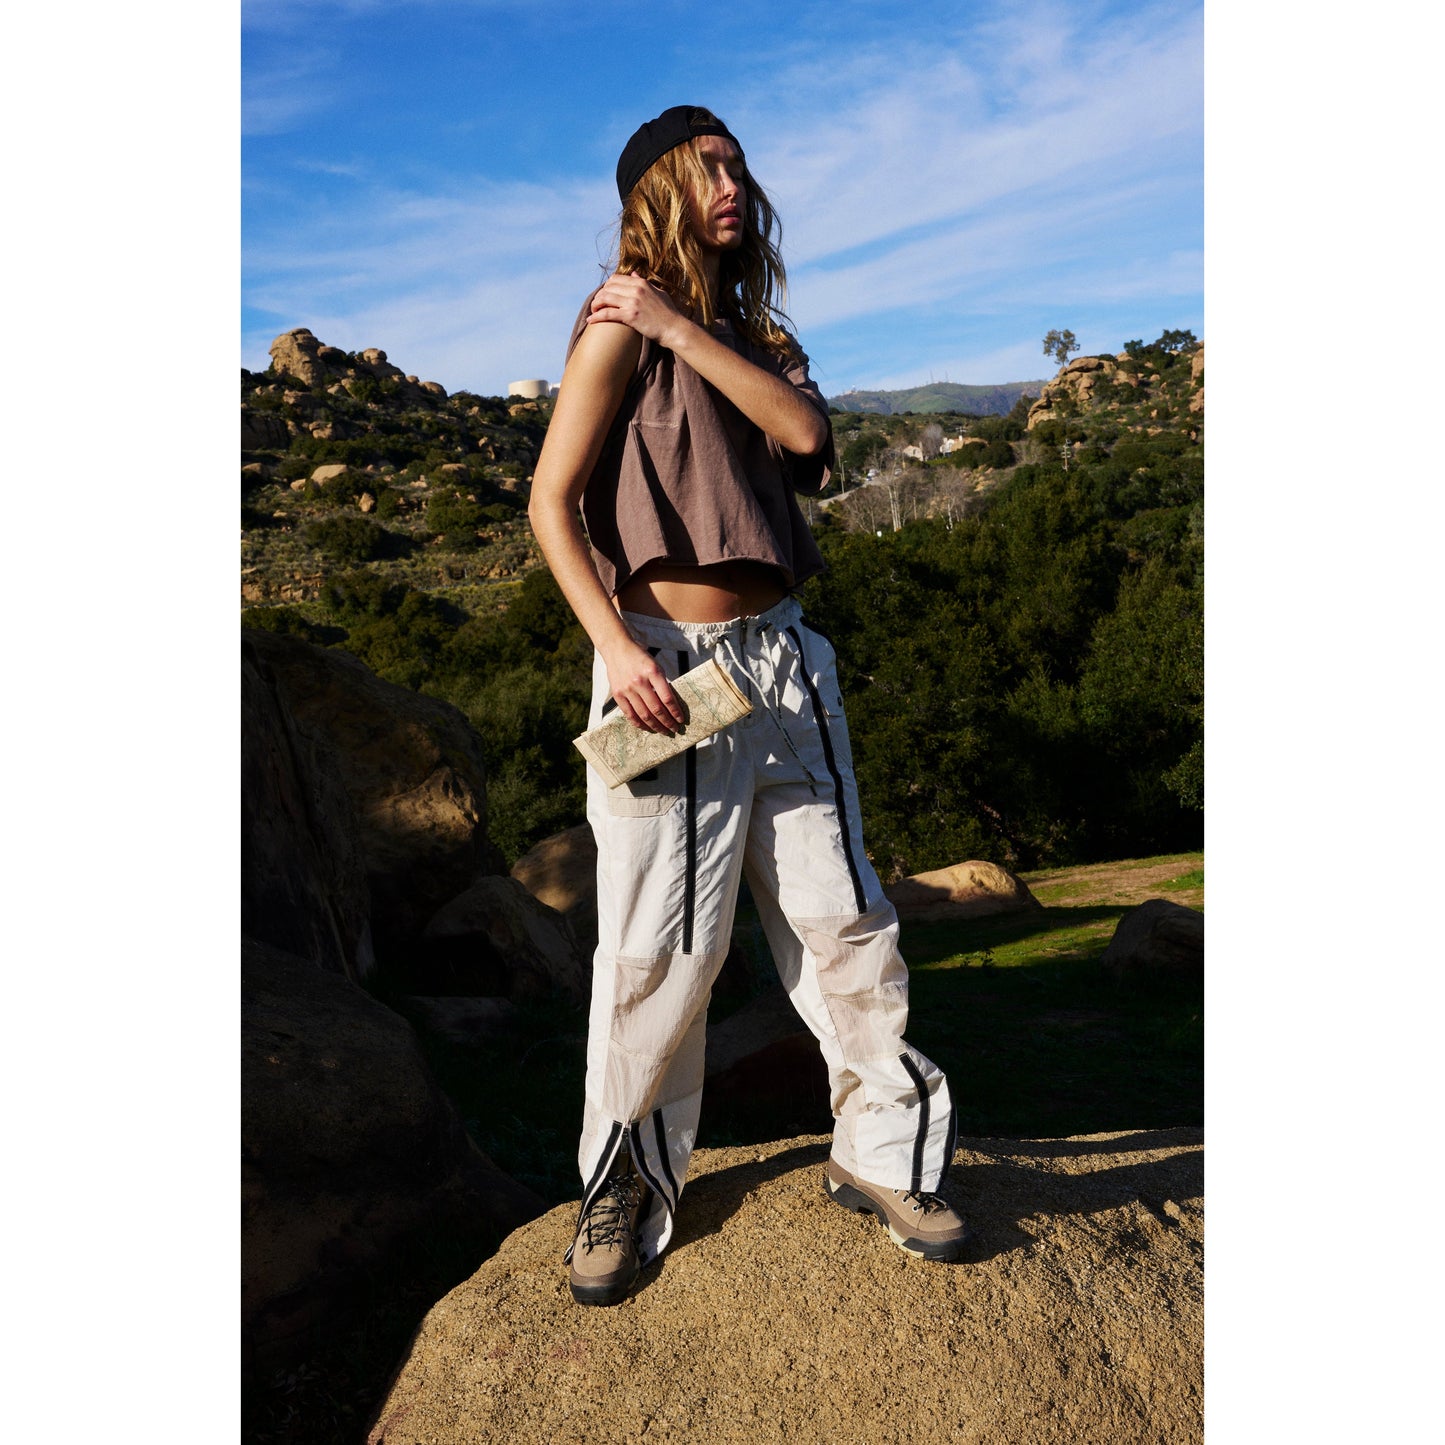 A person with long hair wearing a Free People Movement Inspire Tee in Wild Mustang, oversized boxy fit crop top, cargo pants, and boots stands holding a book in a rugged outdoor setting with hills in the background.